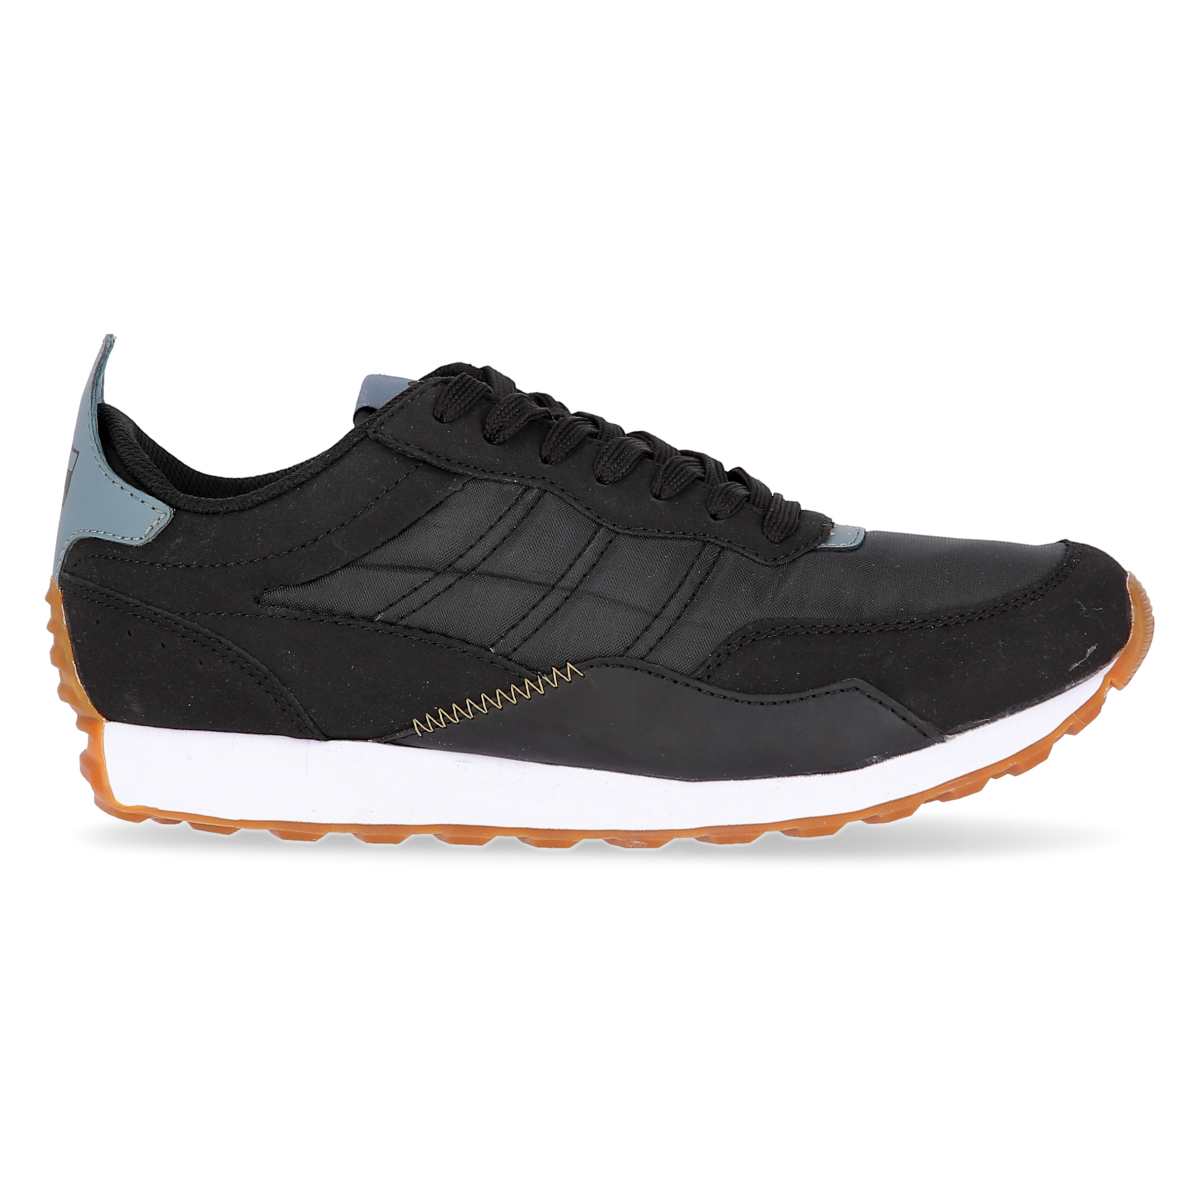 Zapatillas Topper Temple Unisex,  image number null